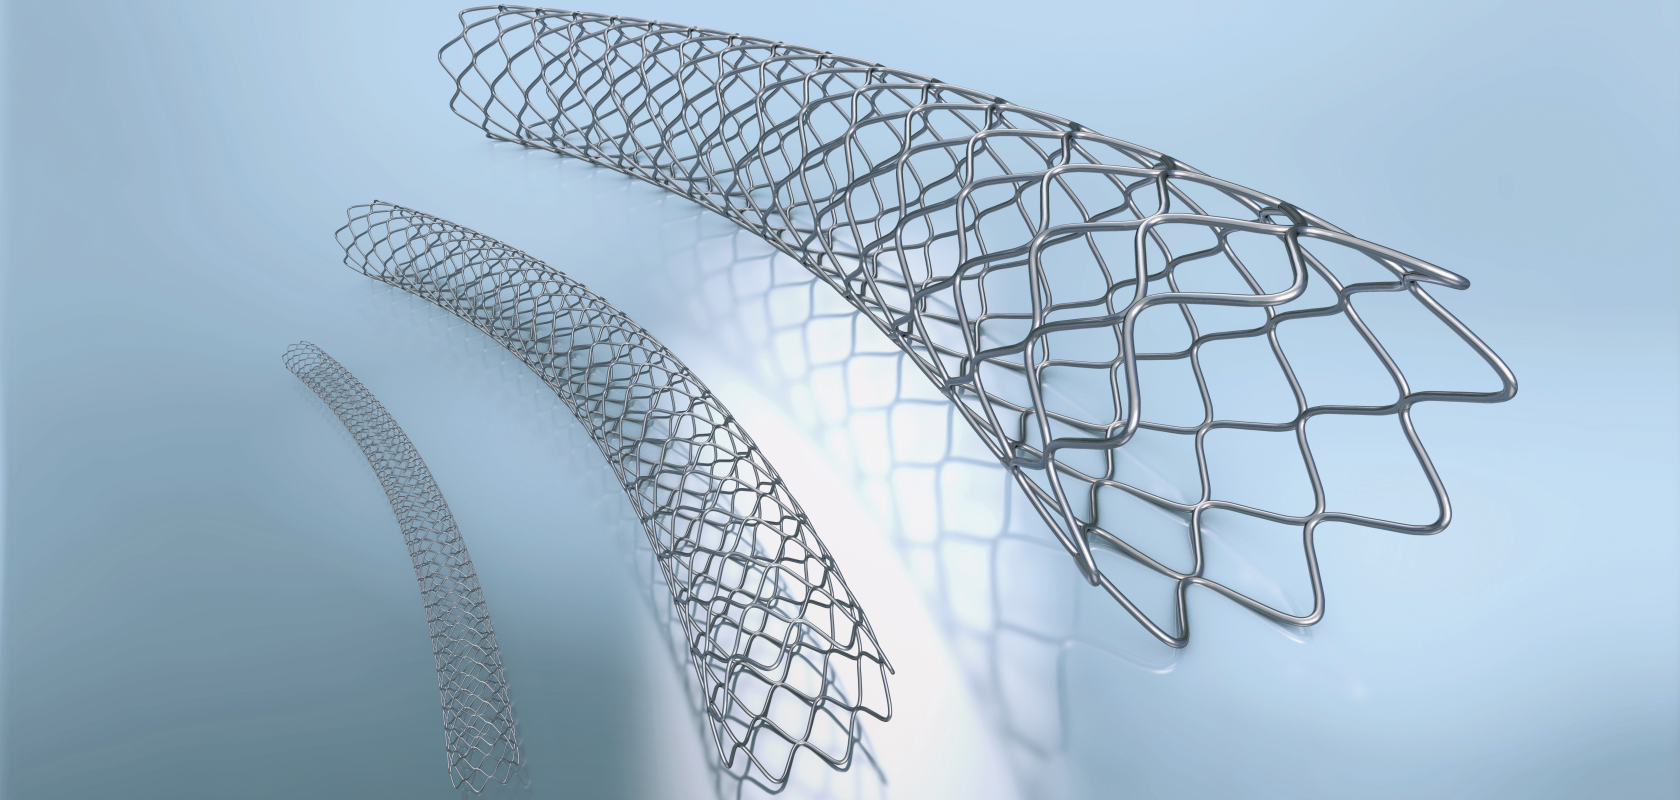 Stent manufacturing